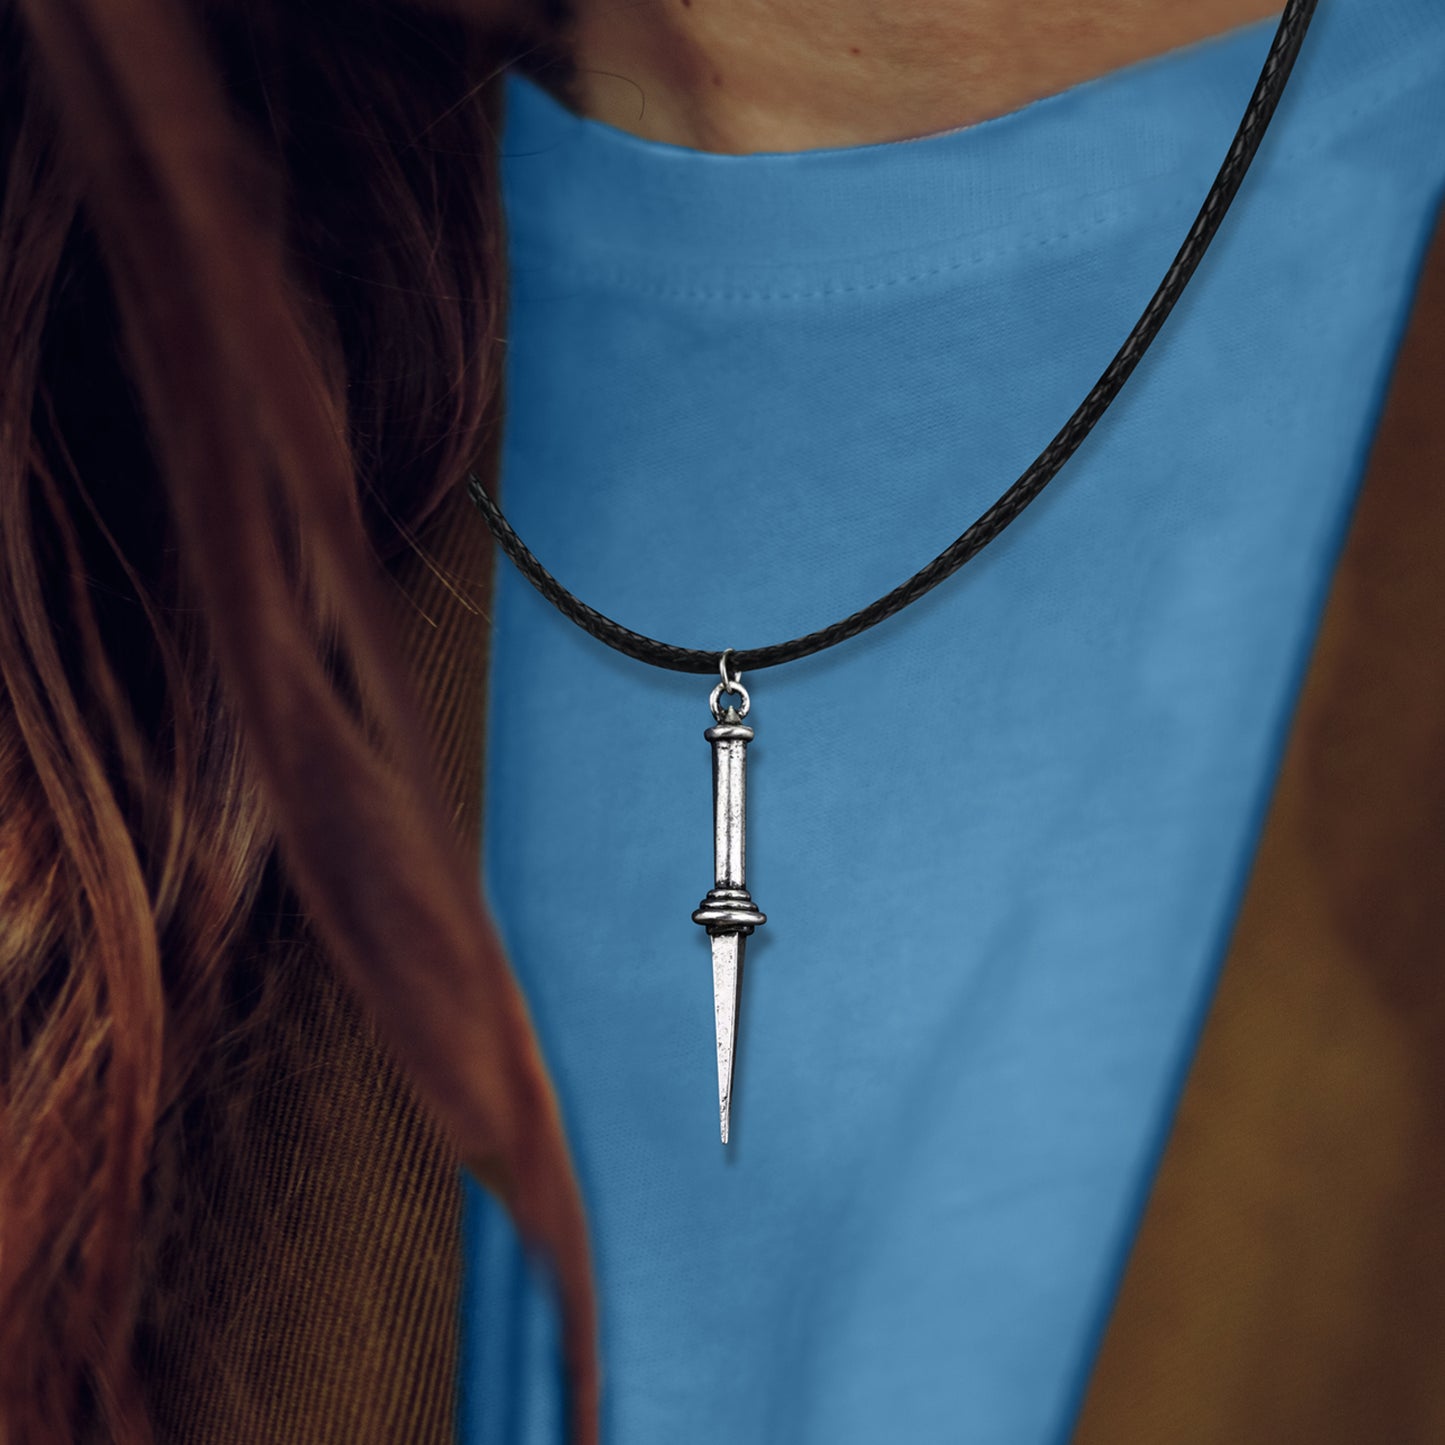 Close up of a necklace pendant against a model's blue shirt. The pendant is in the shape of triple-edge Angel Blade. A black leather cord is attached to the hilt.